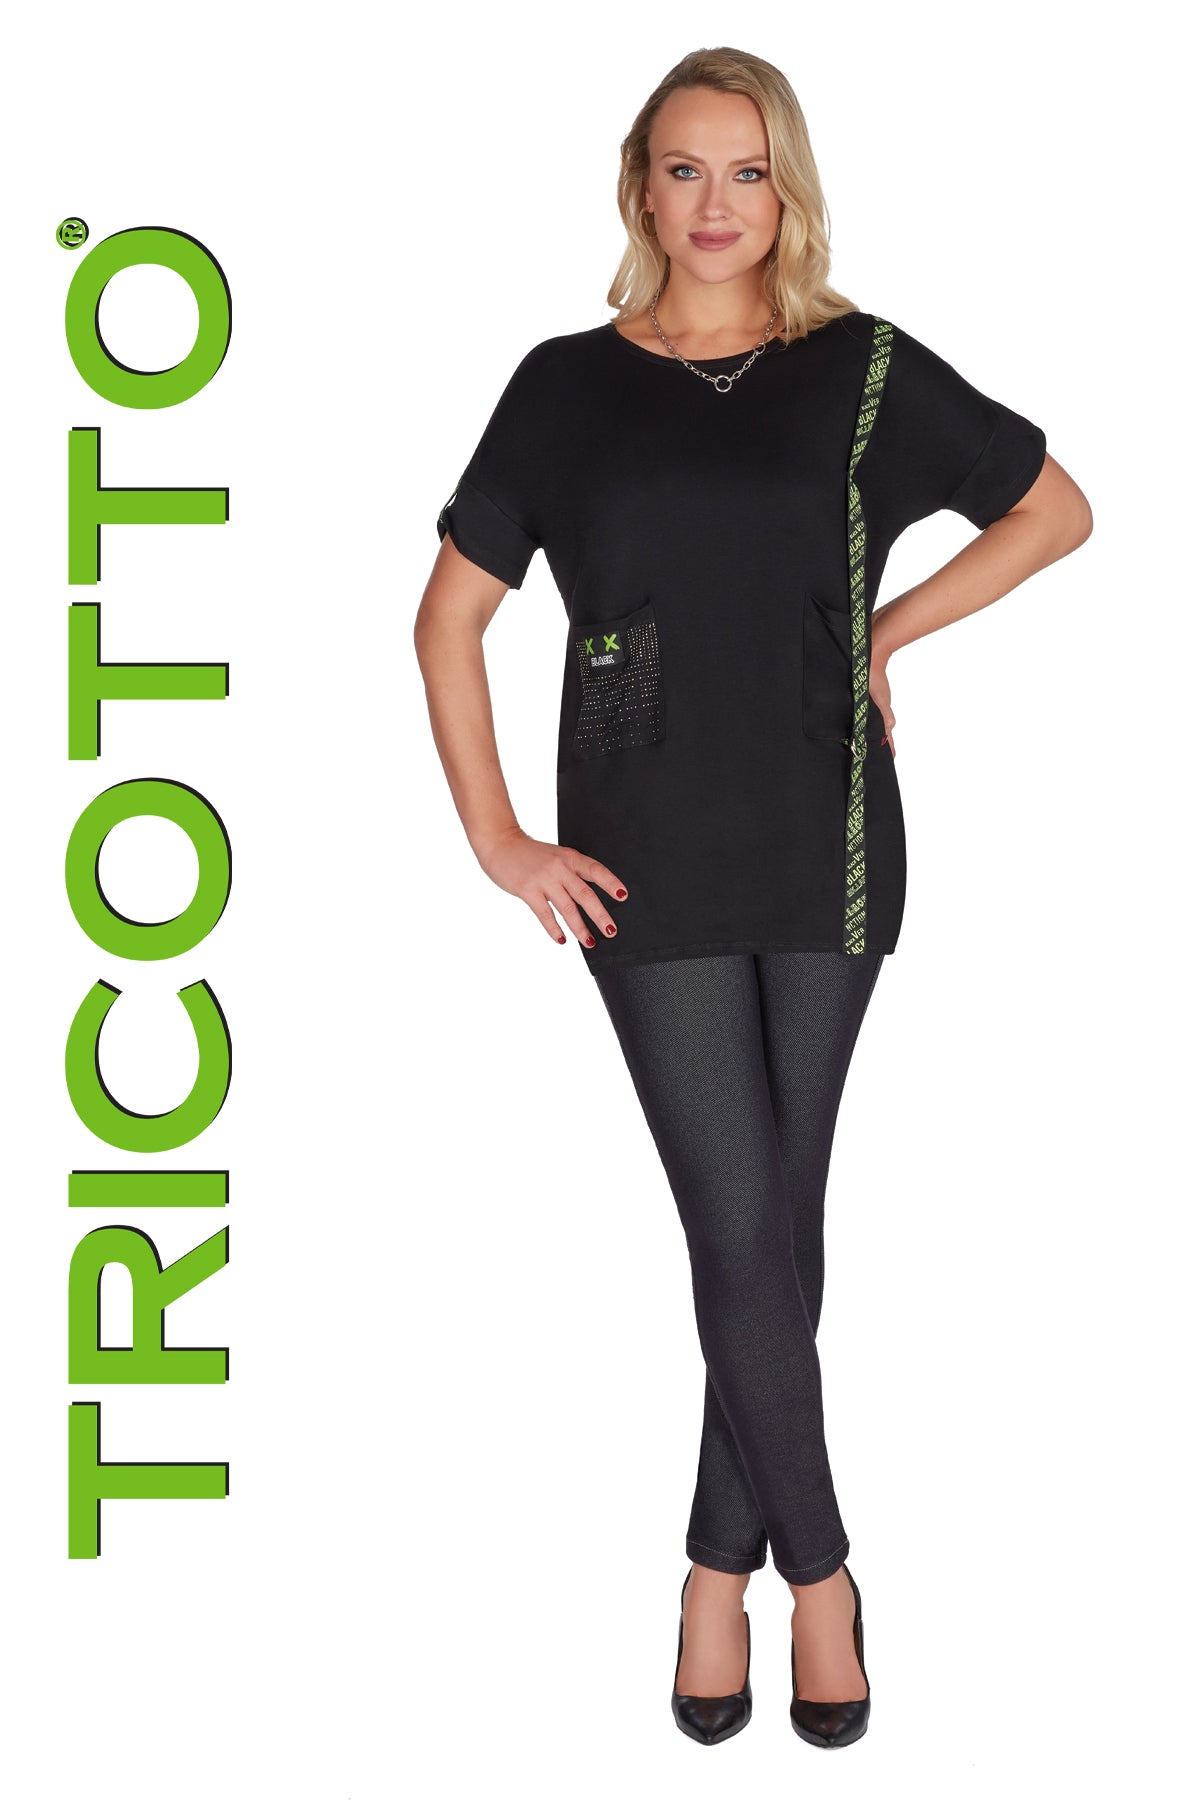 Tricotto Clothing Online-Tricotto Tunics-Tricotto Clothing Montreal-Tricotto T-shirts-Women's Tunics Online Canada